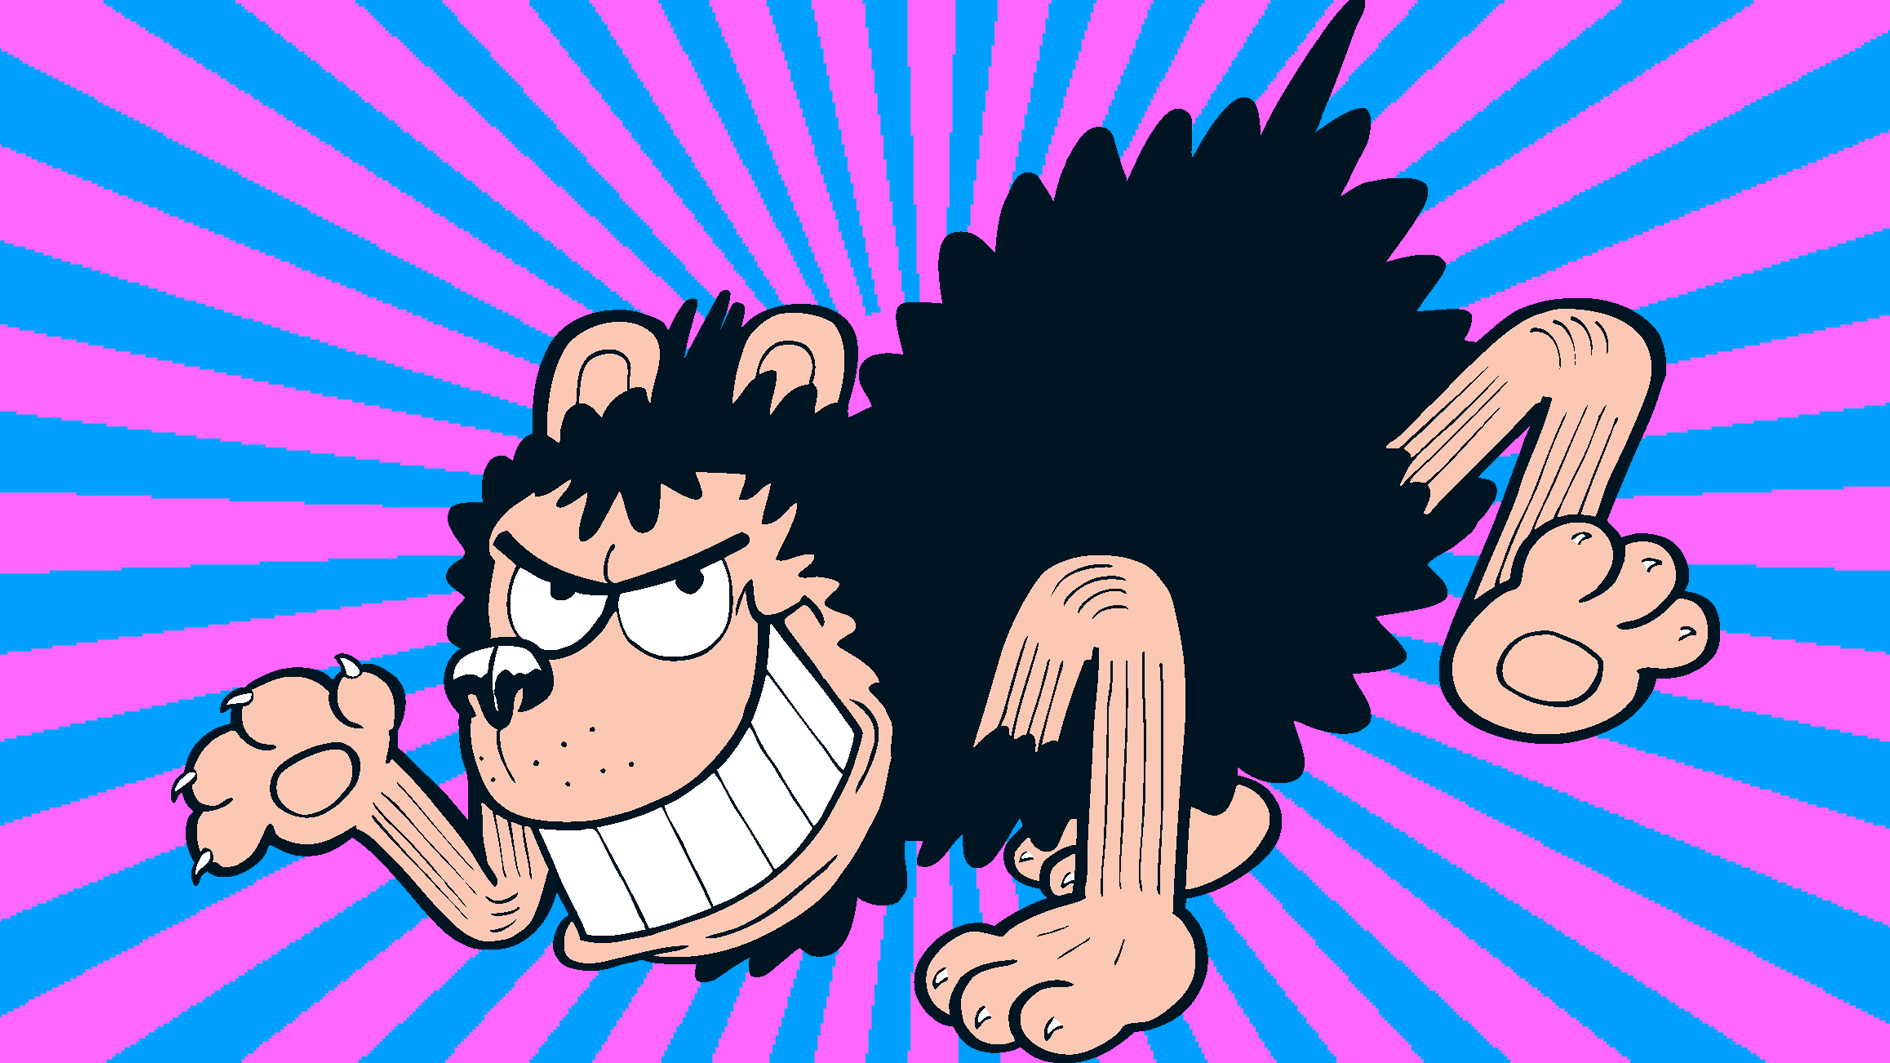 Gnasher on a purple background